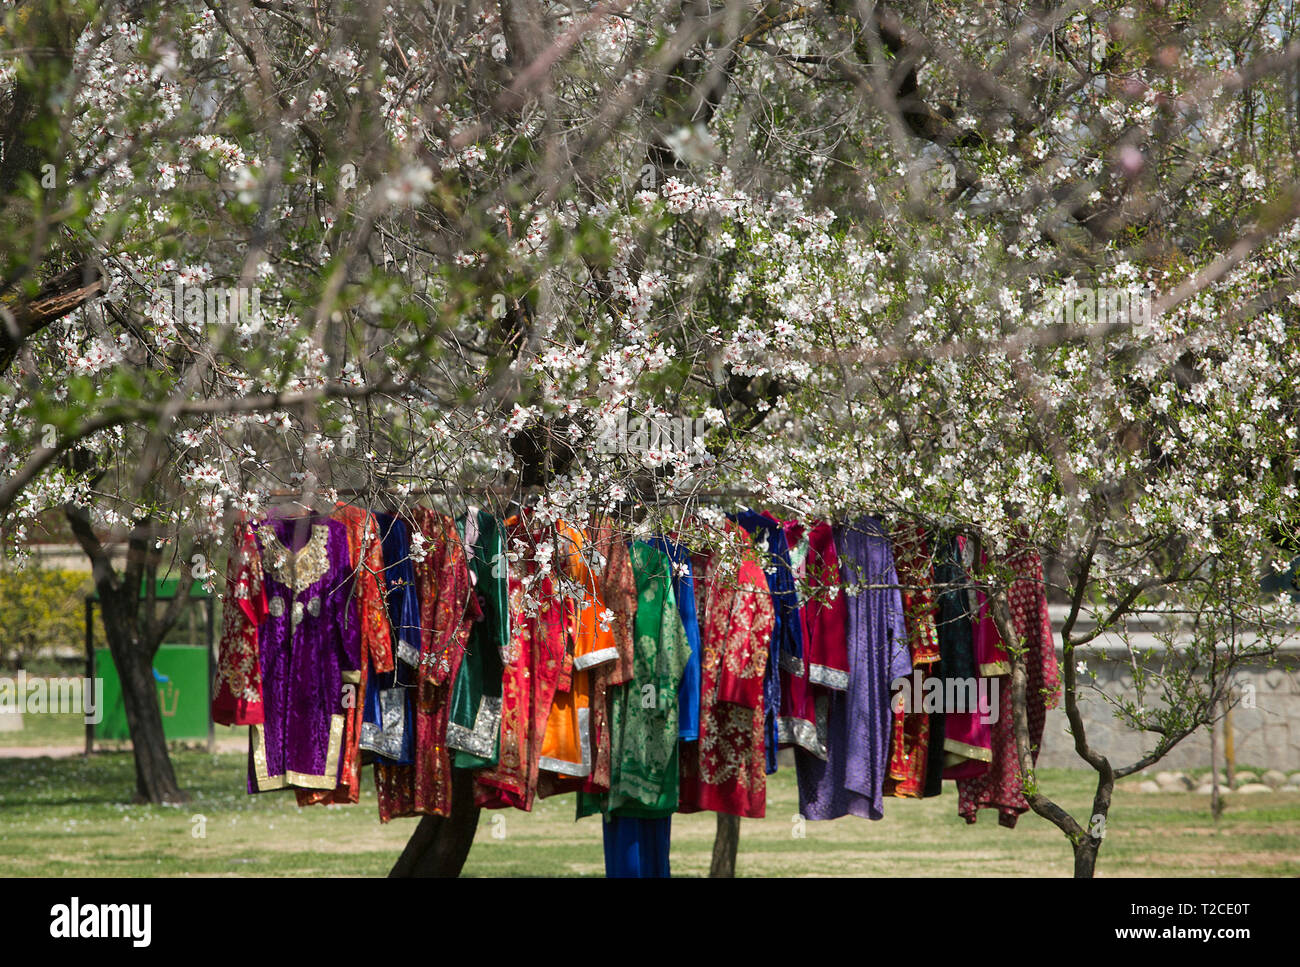 Srinagar, Indian-controlled Kashmir. 1st Apr, 2019. Kashmiri traditional clothes are seen hanging near blossoming trees in Srinagar, the summer capital of Indian-controlled Kashmir, April 1, 2019. Indian-controlled Kashmir witnesses the arrival of spring after the long spell of winter season. Credit: Javed Dar/Xinhua/Alamy Live News Stock Photo